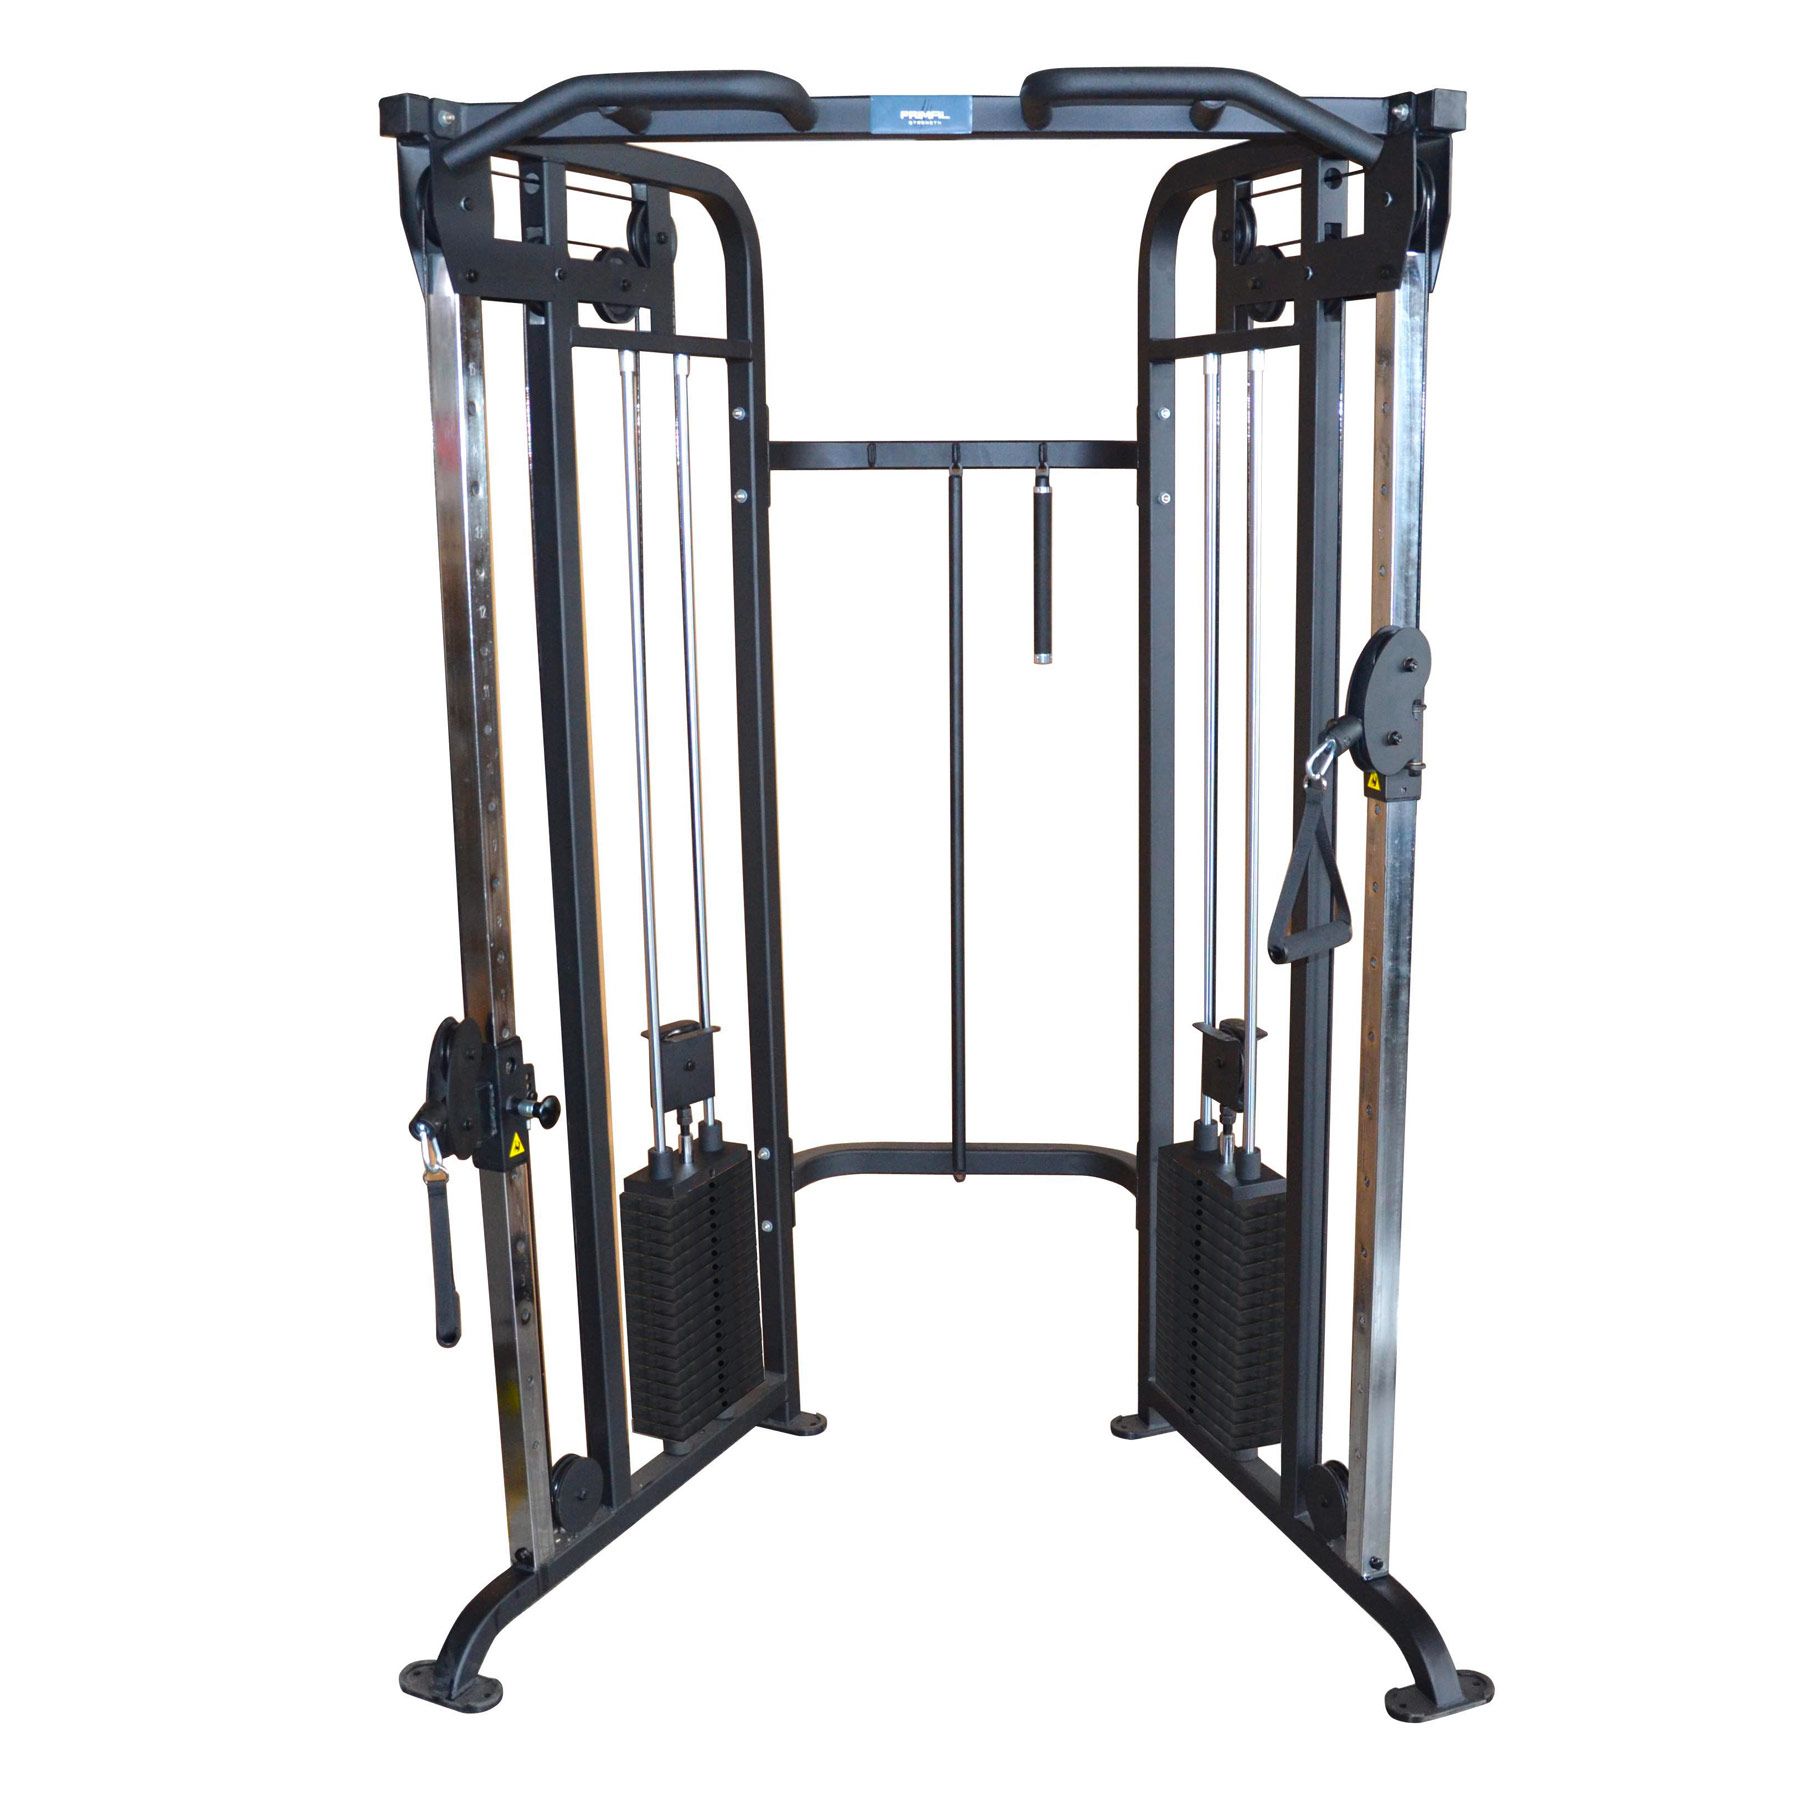 Maximizing Your Workout: How To Effectively Use An Adjustable Dual Pulley Cable Station